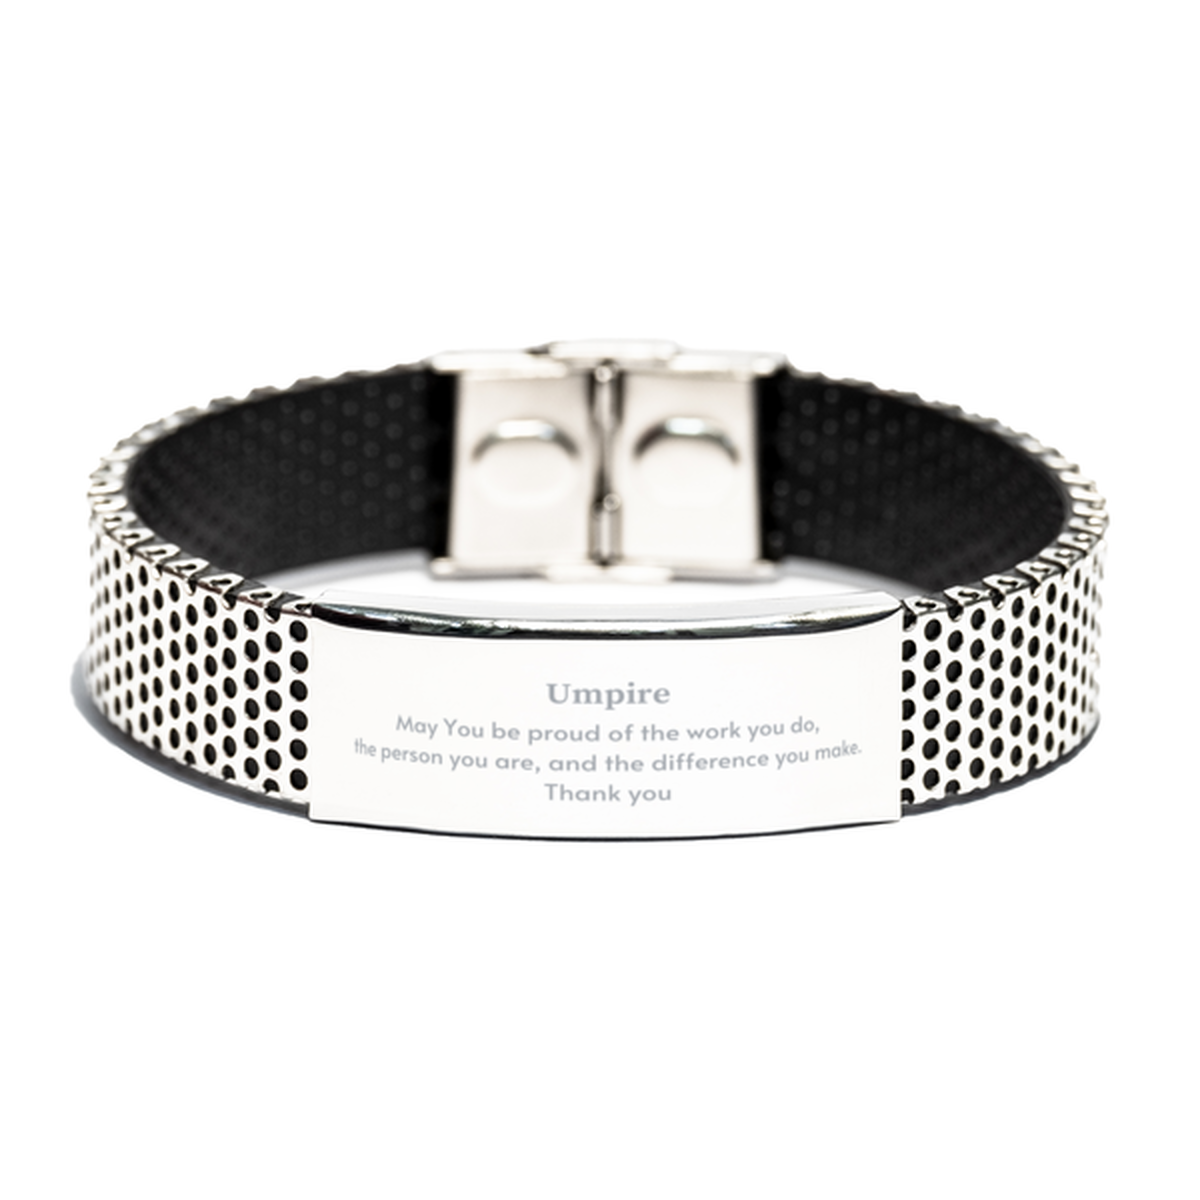 Heartwarming Stainless Steel Bracelet Retirement Coworkers Gifts for Umpire, Umpire May You be proud of the work you do, the person you are Gifts for Boss Men Women Friends